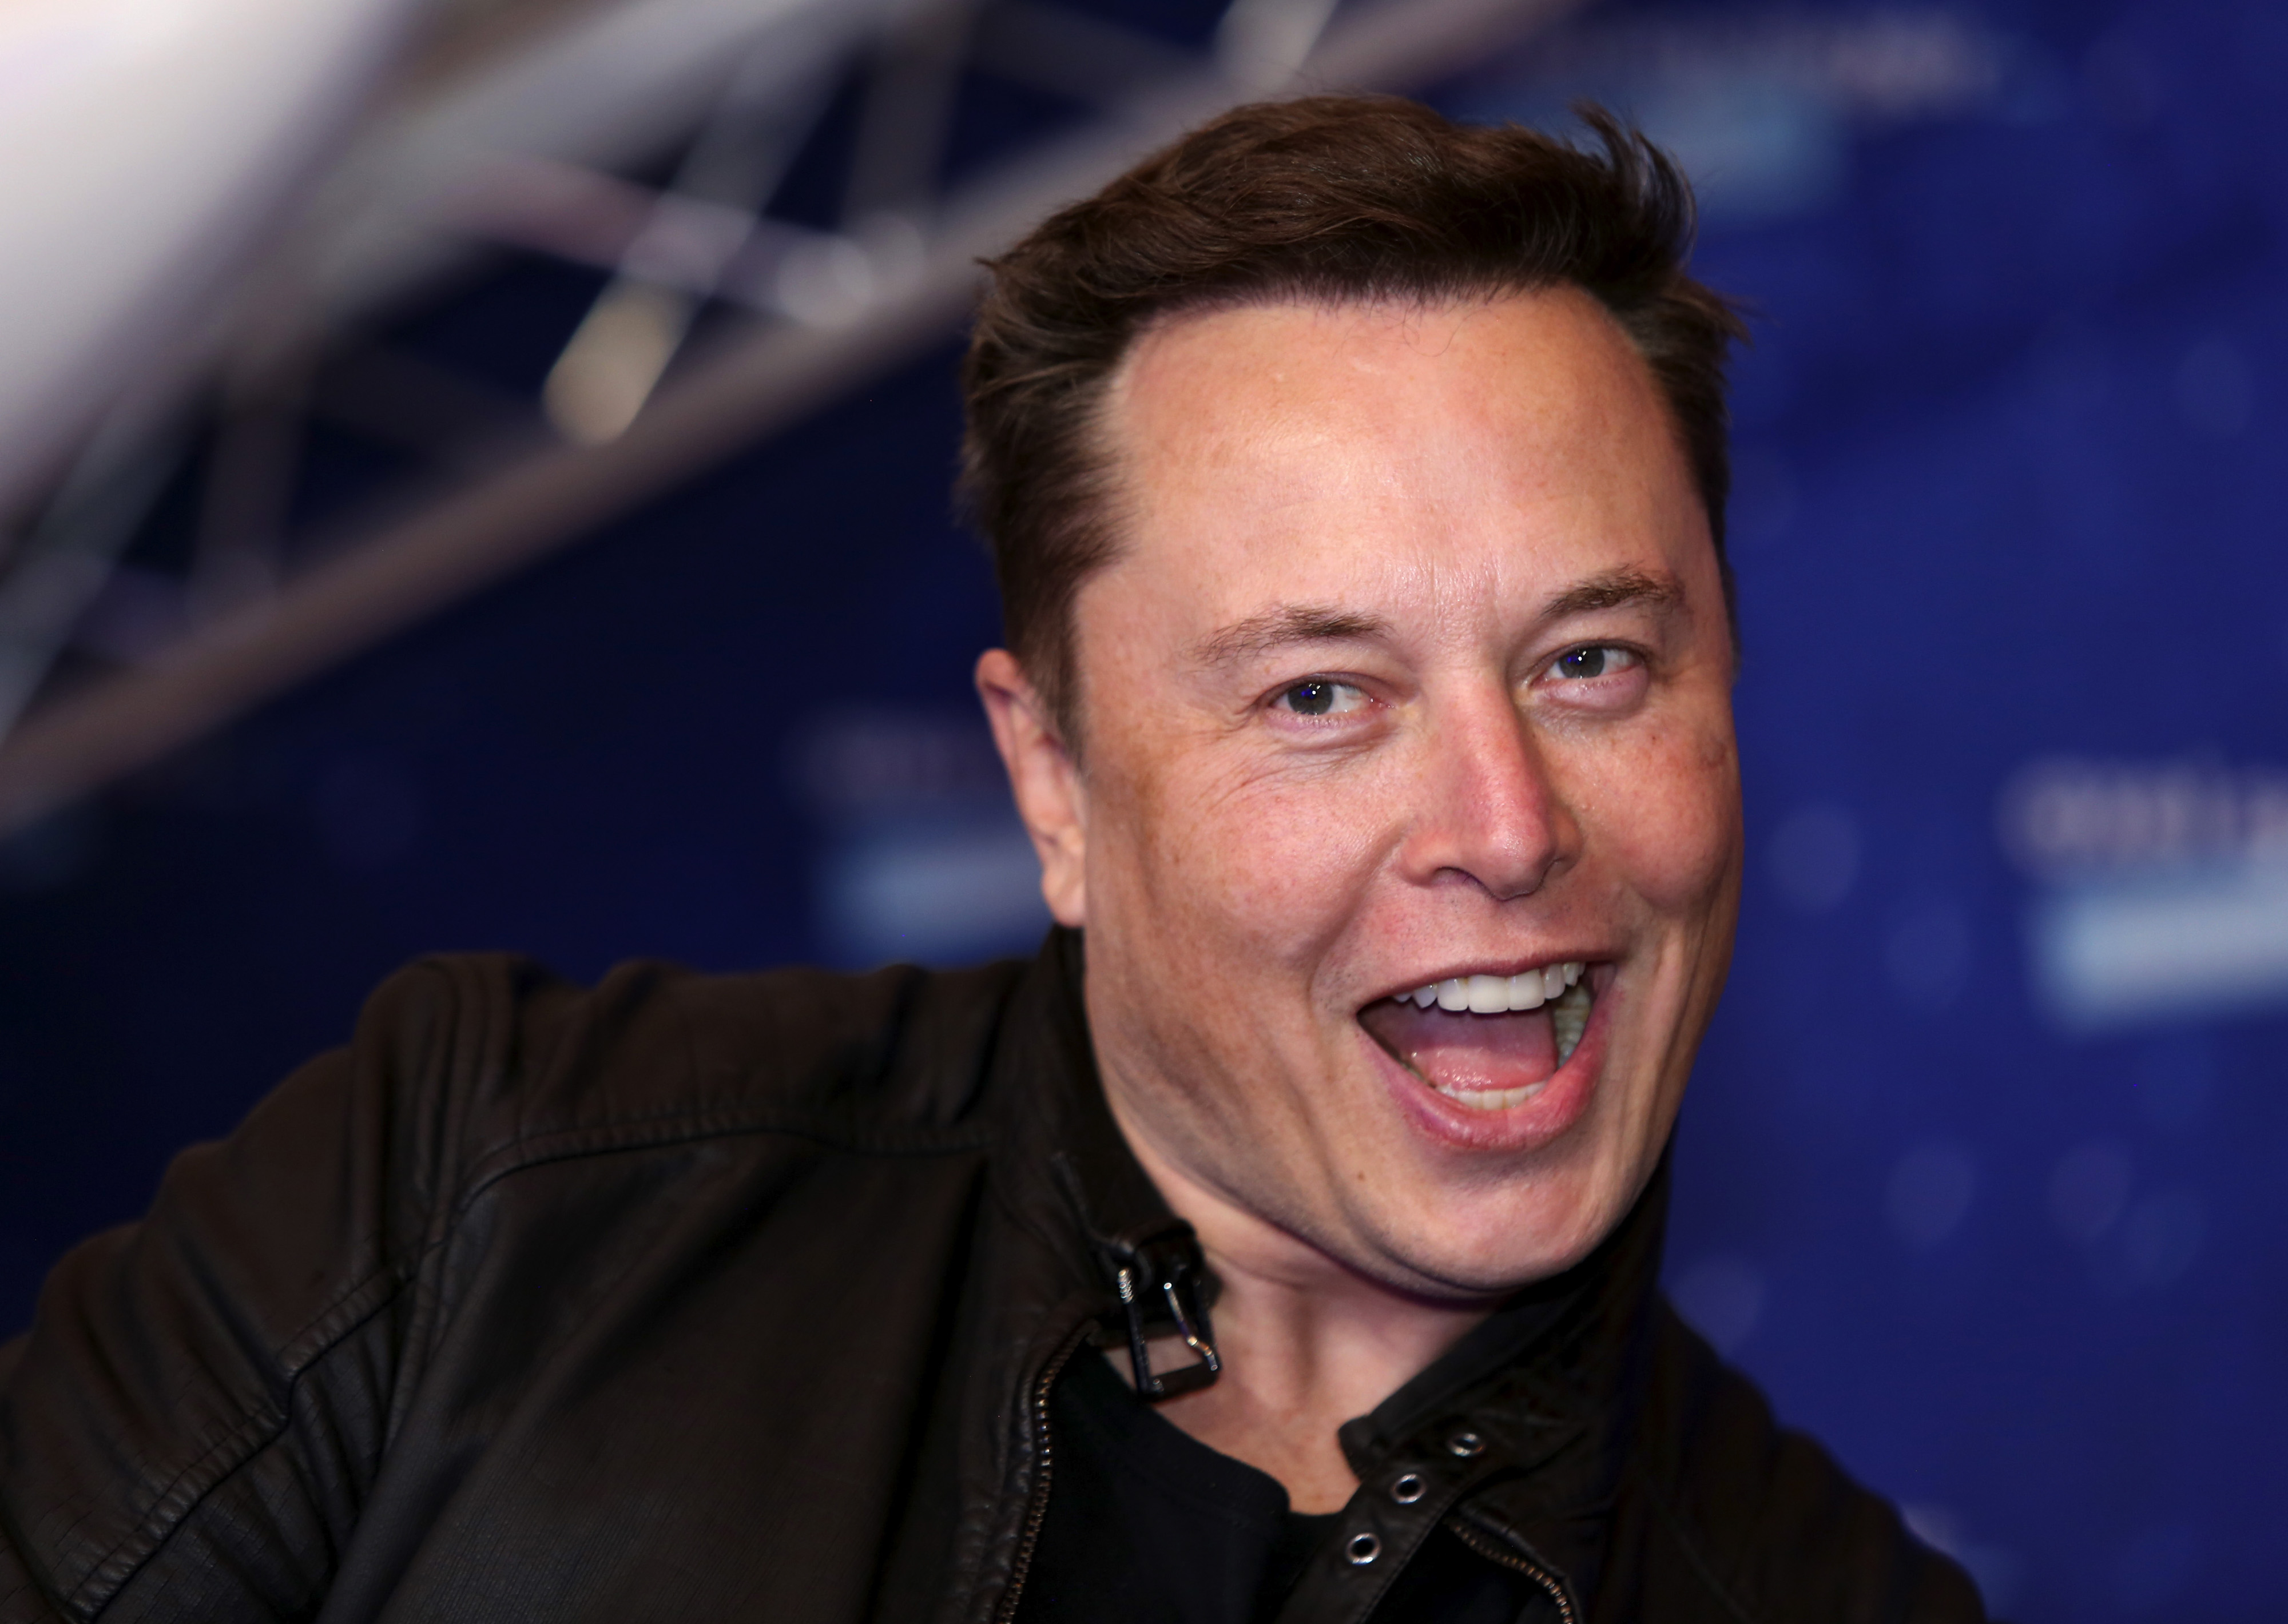 Elon Musk launches new Burnt Hair perfume with fragrance of repugnant  desire  The Star